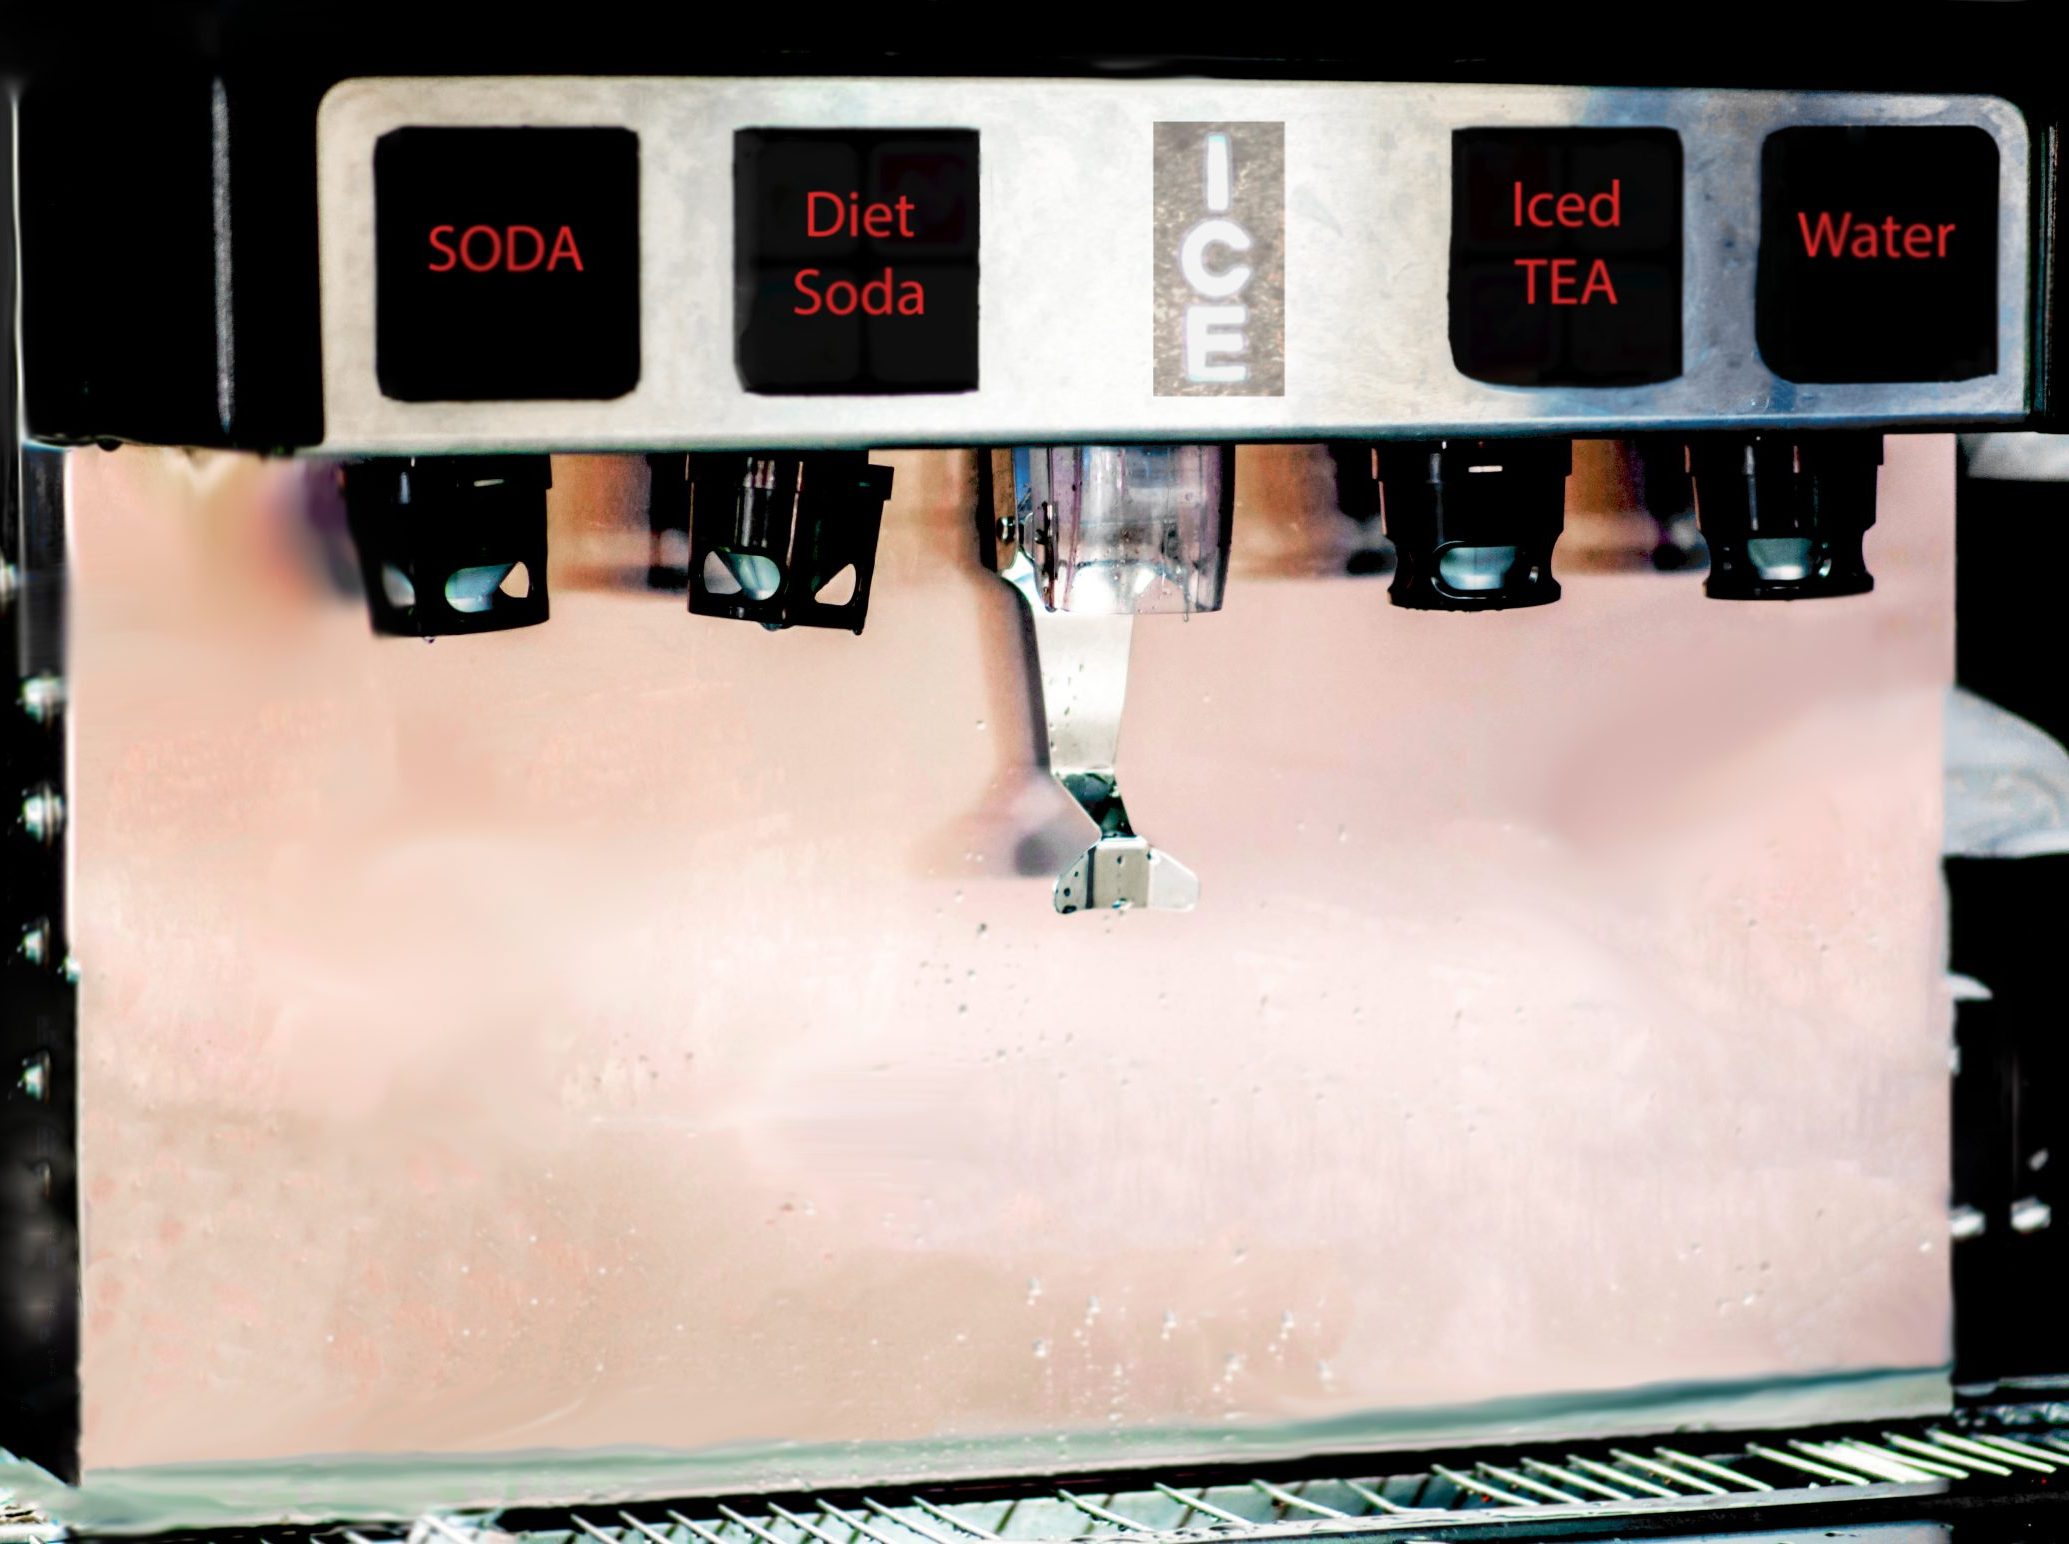 A soda dispensing machine typical of those found in fast food restaurants.